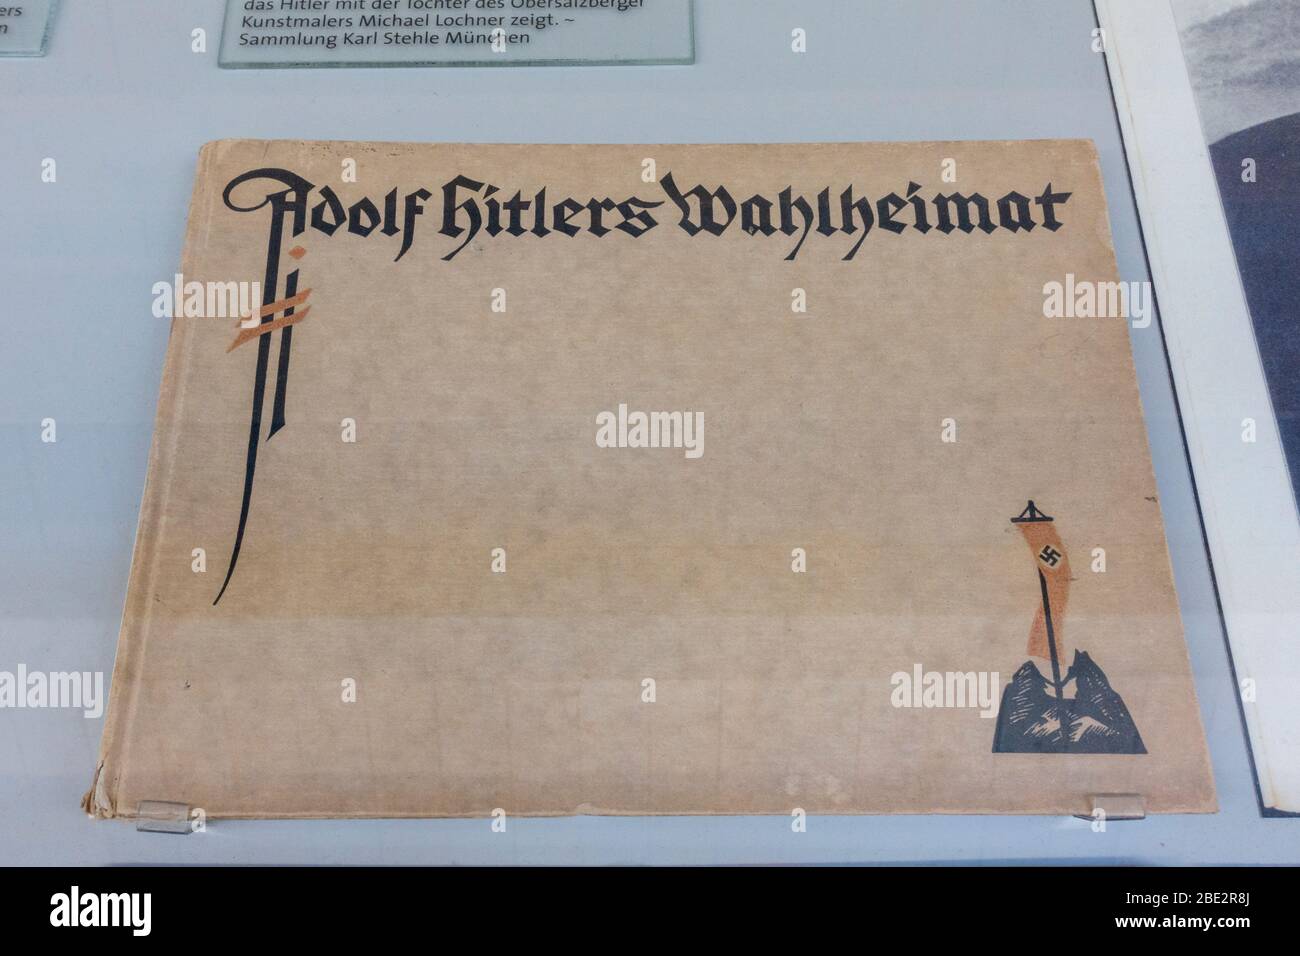 Front cover of book 'Adolf Hitlers Wahlheimat', (Adolf Hitlers Adopted Home', Documentation Center Obersalzburg, Obersalzburg, Bavaria, Germany. Stock Photo